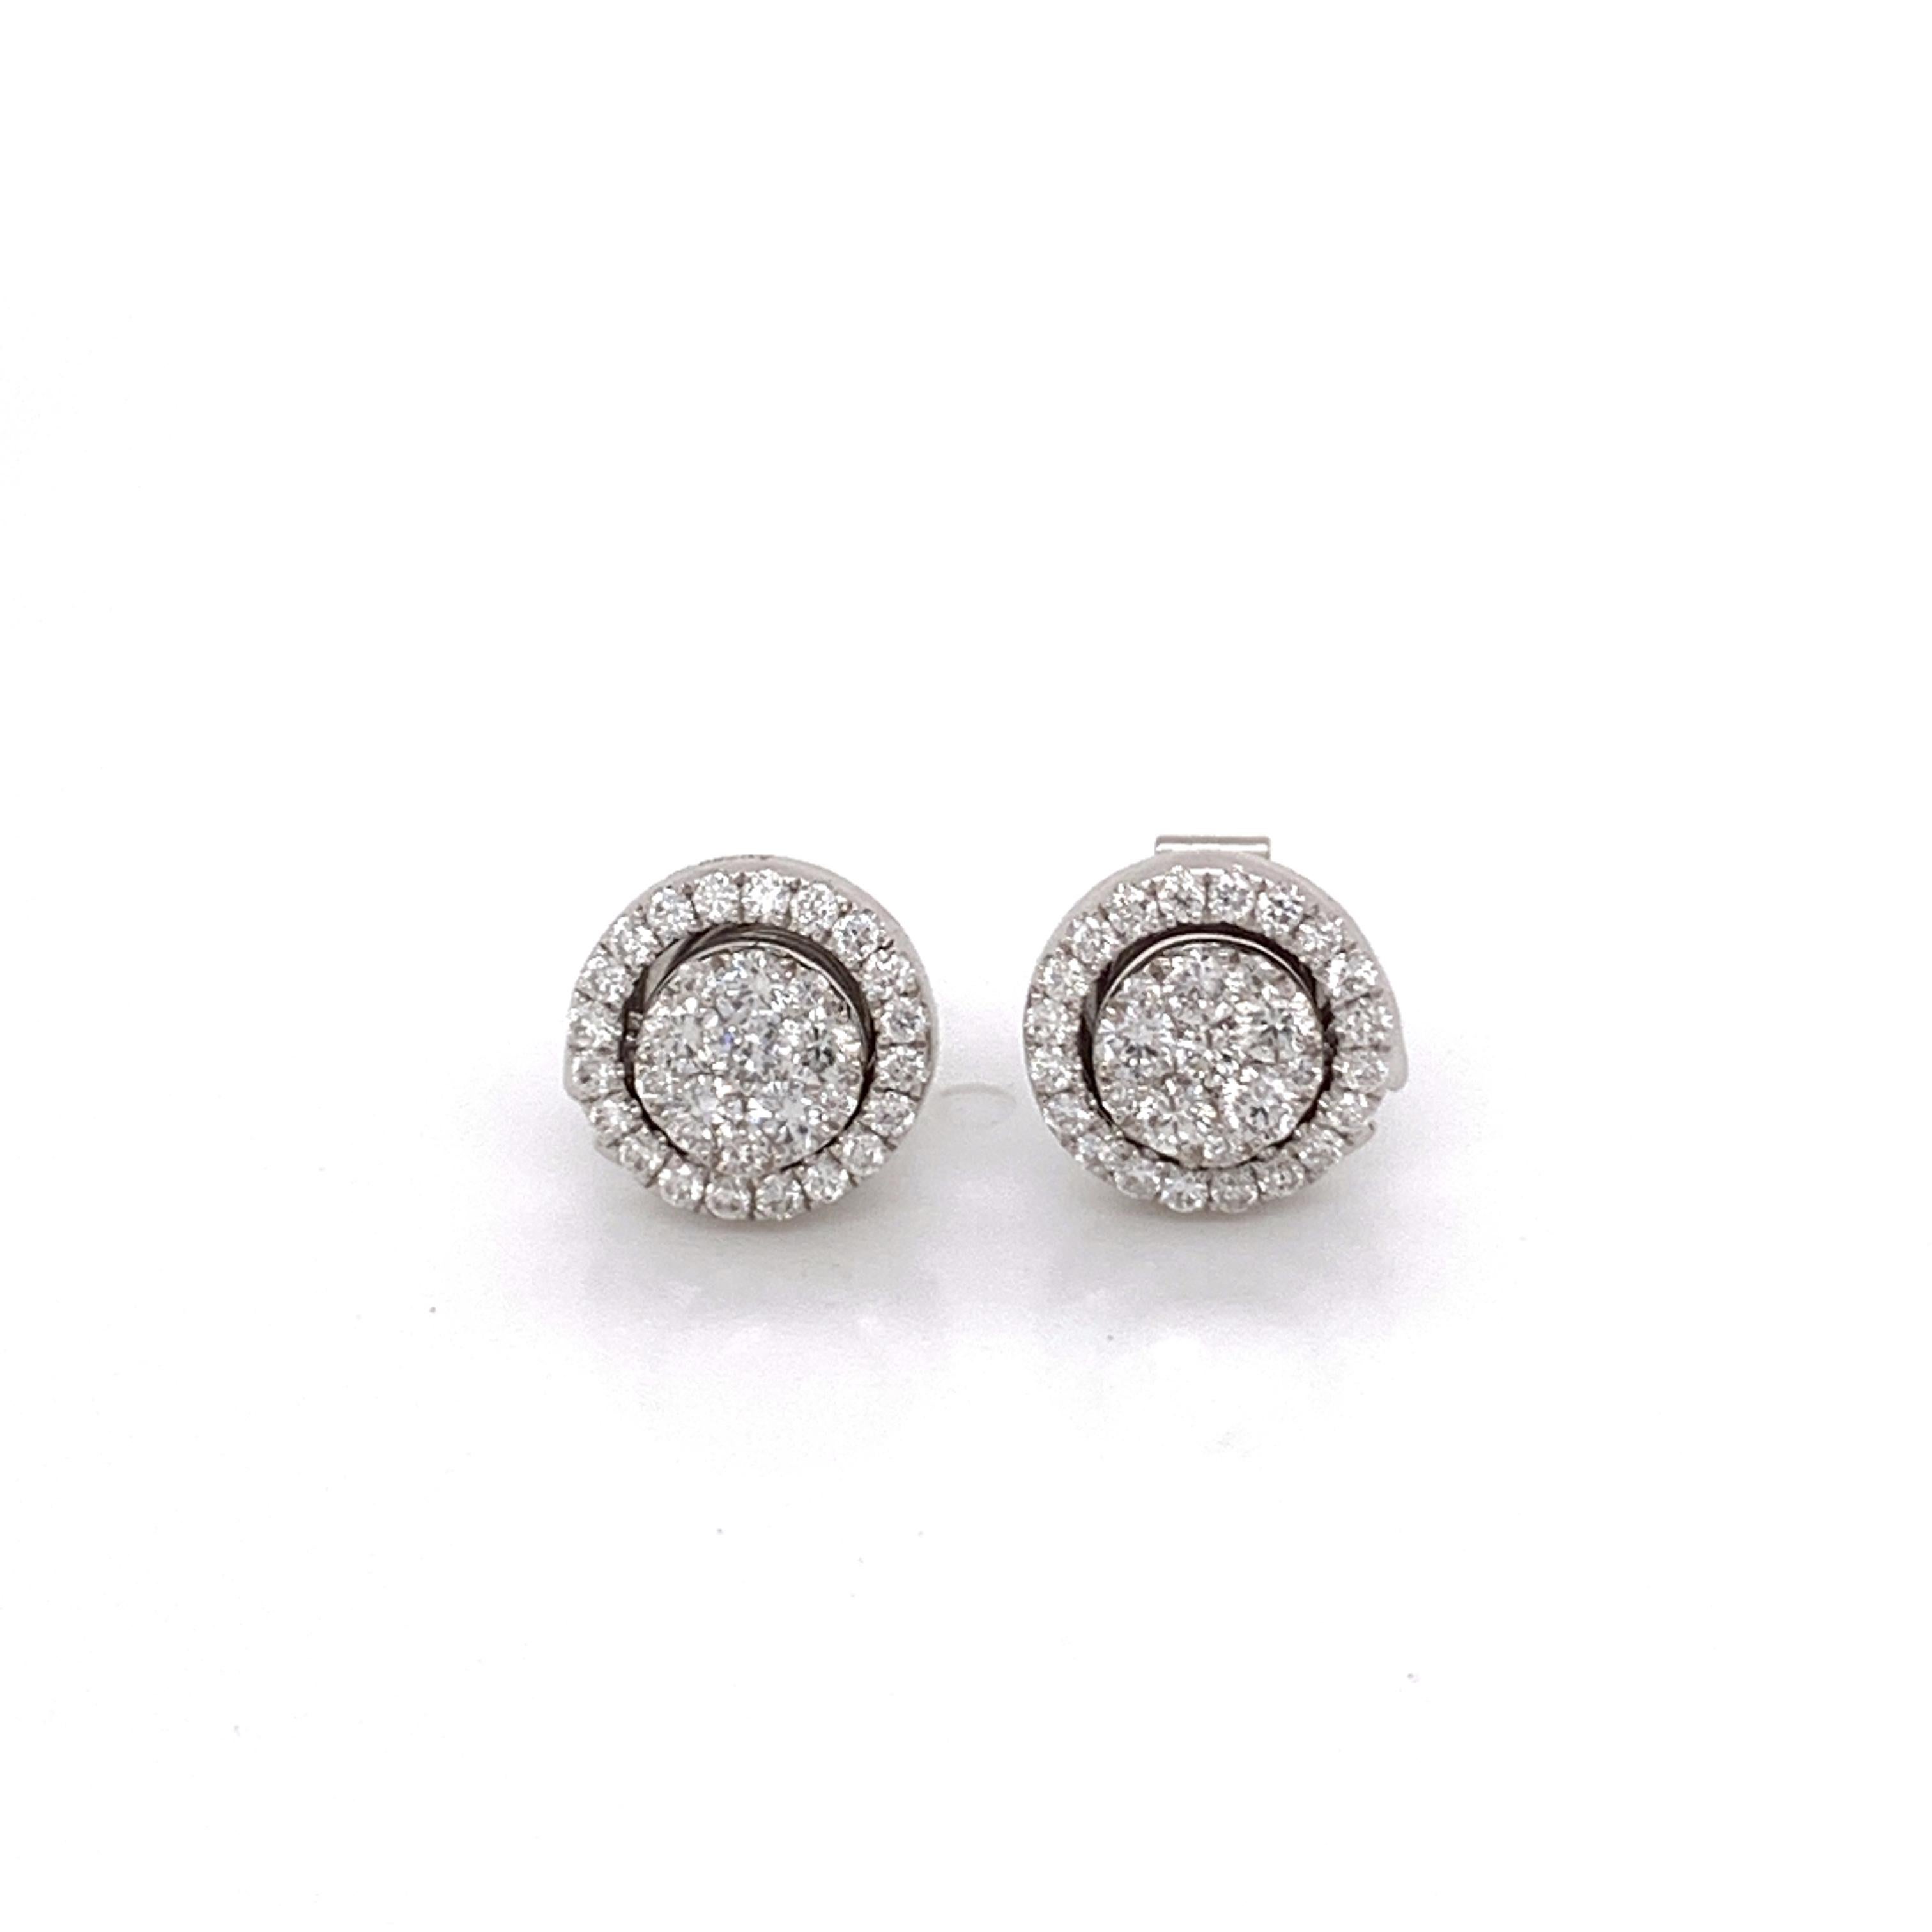 Diamond studs/hoop convertibles, made with real/natural brilliant cut diamonds. Total Diamond Weight: 0.55cts. Diamond Quantity: 62 (round diamonds). Color: G. Clarity: VS. Mounted on 18 karat white gold, push back setting.